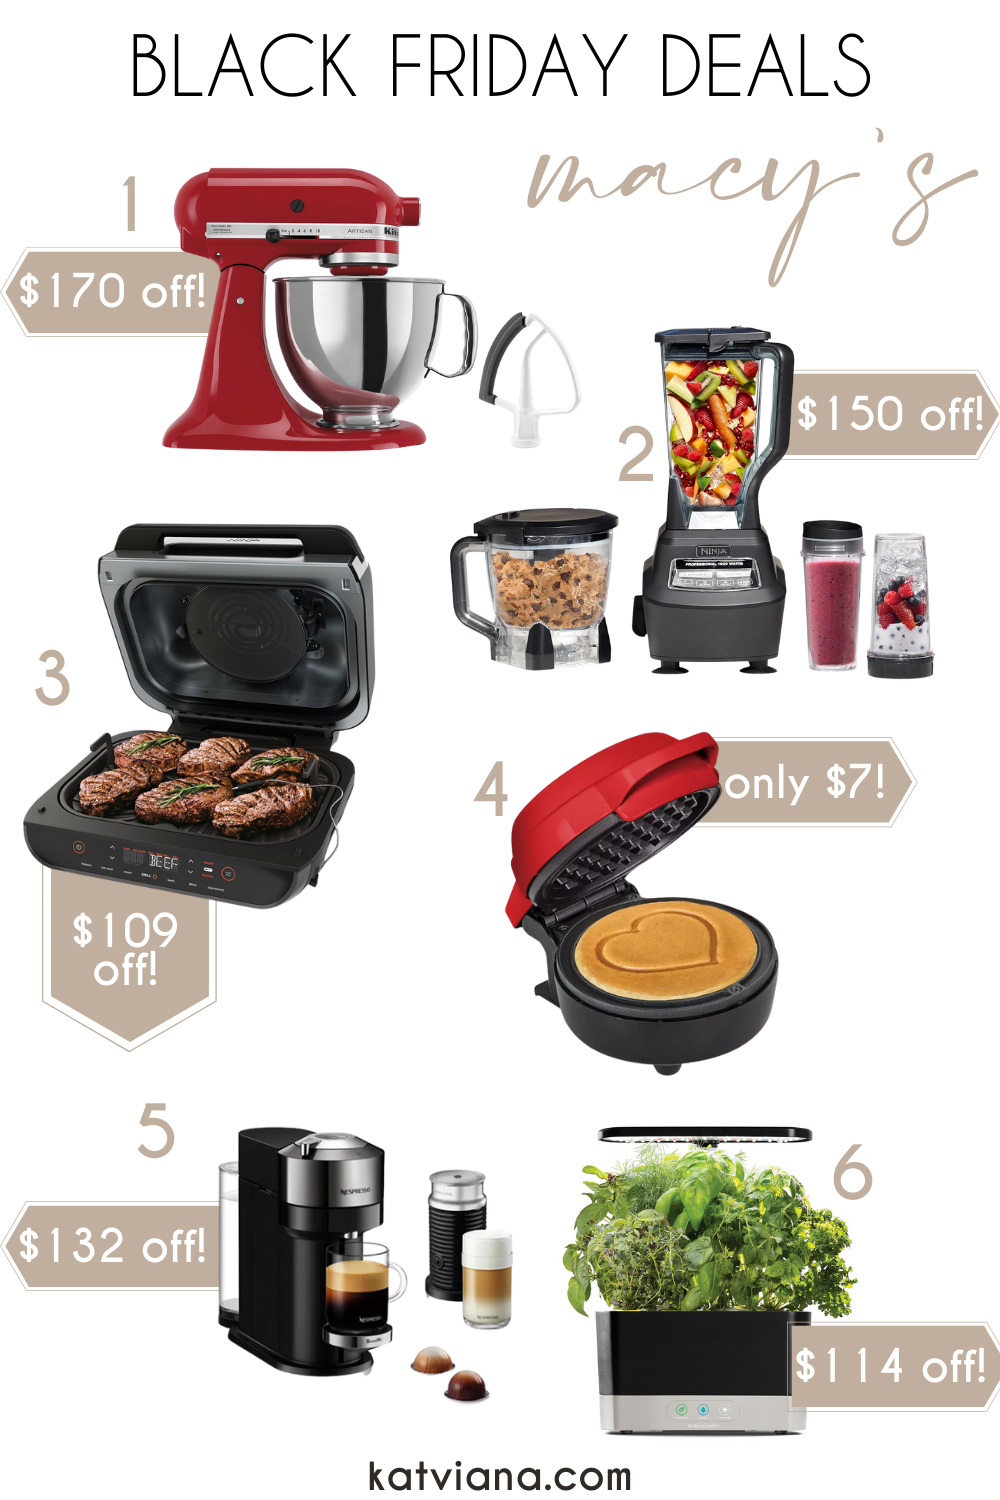 The best Black Friday deals from Macy's: $170 off KitchenAid stand mixer, $150 off Ninja blender and food processor, $132 off Nespresso machines and mini waffle makers for only $7! | Kat Viana